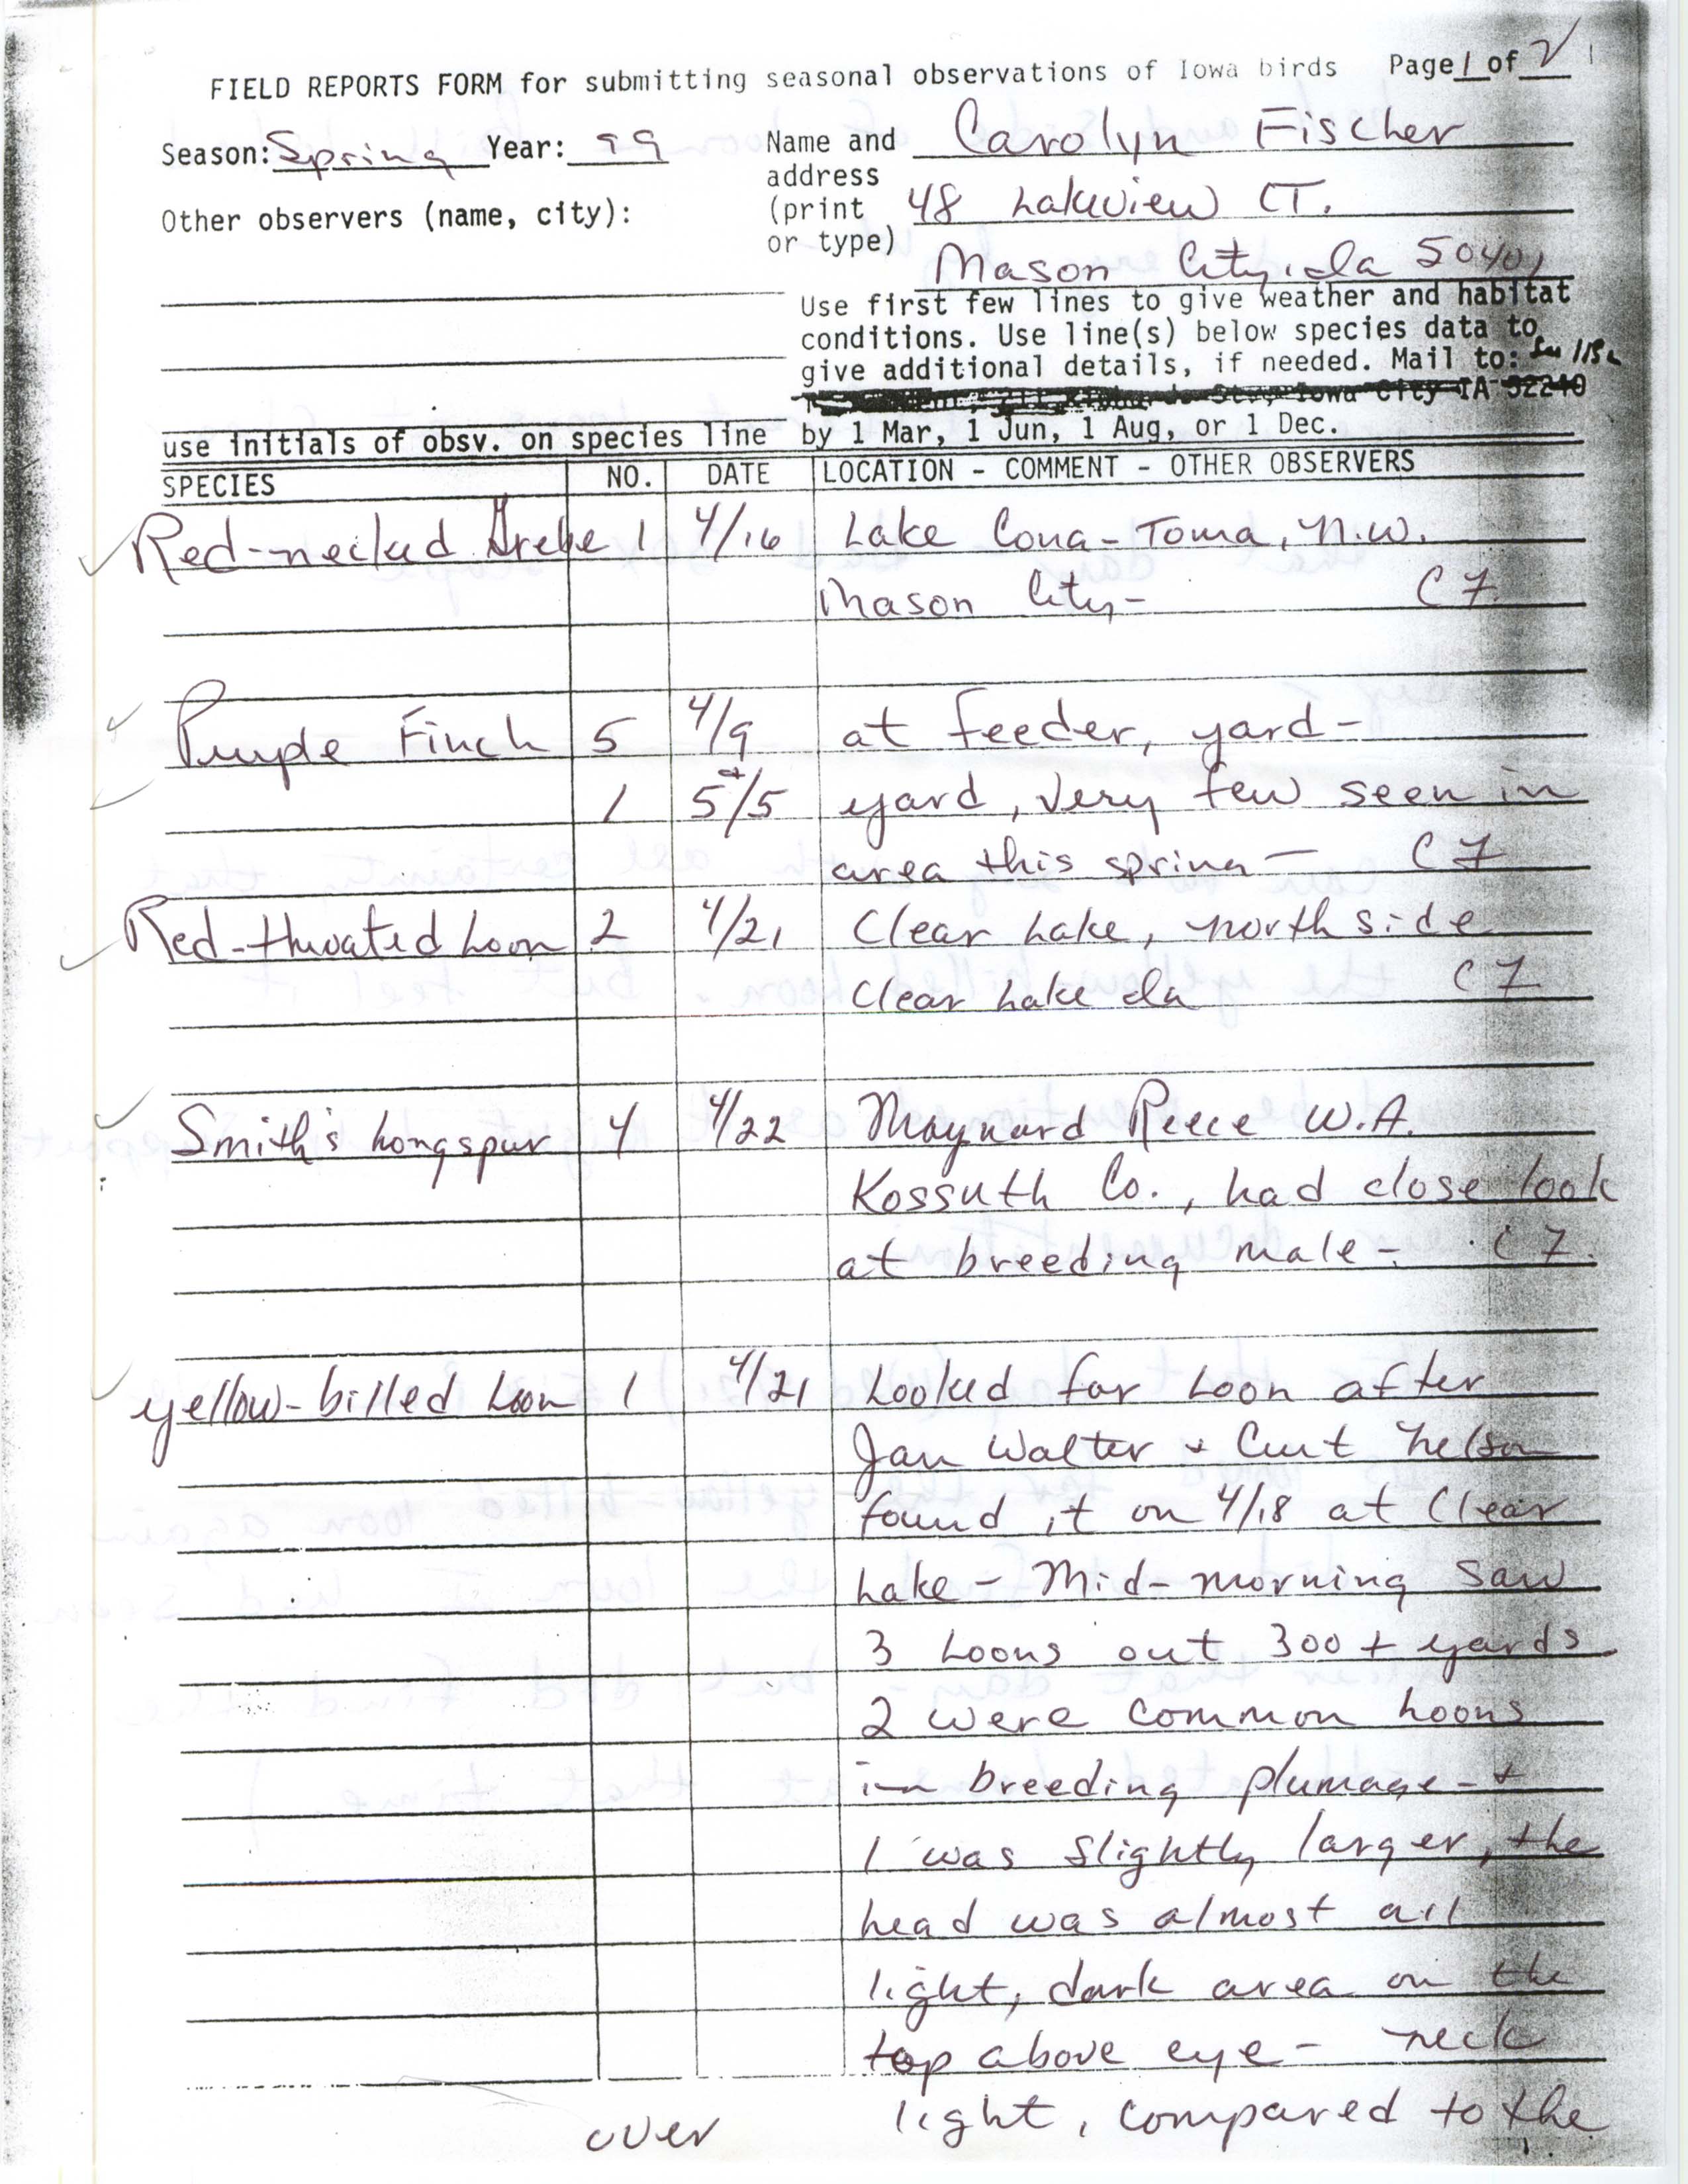 Field reports form for submitting seasonal observations of Iowa birds, Carolyn Fischer, spring 1999